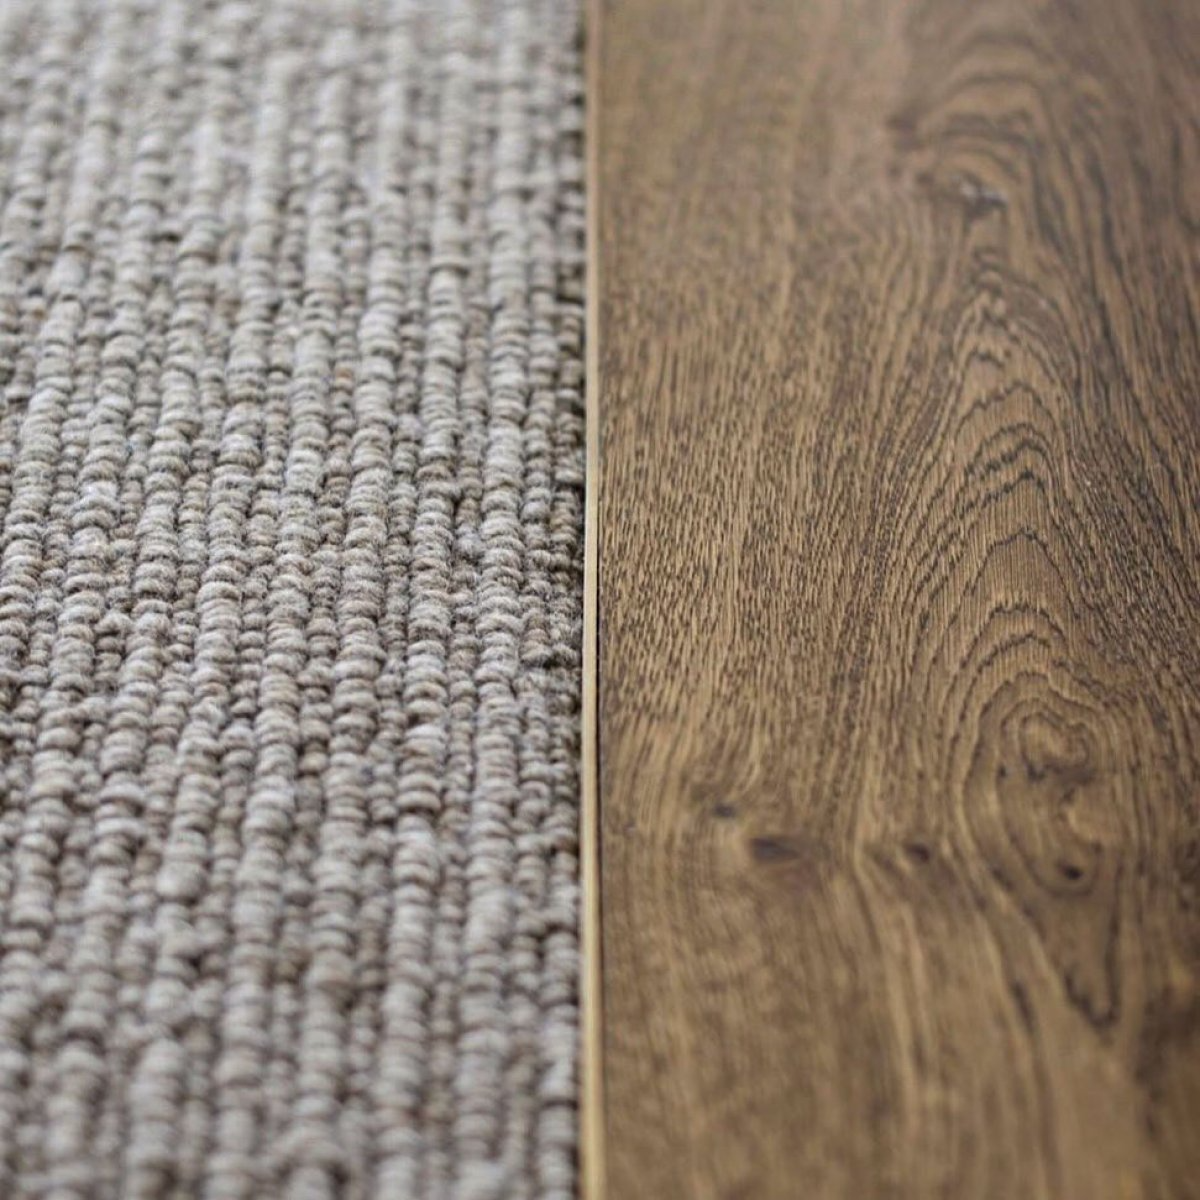 The various wooden flooring types you can
chose from